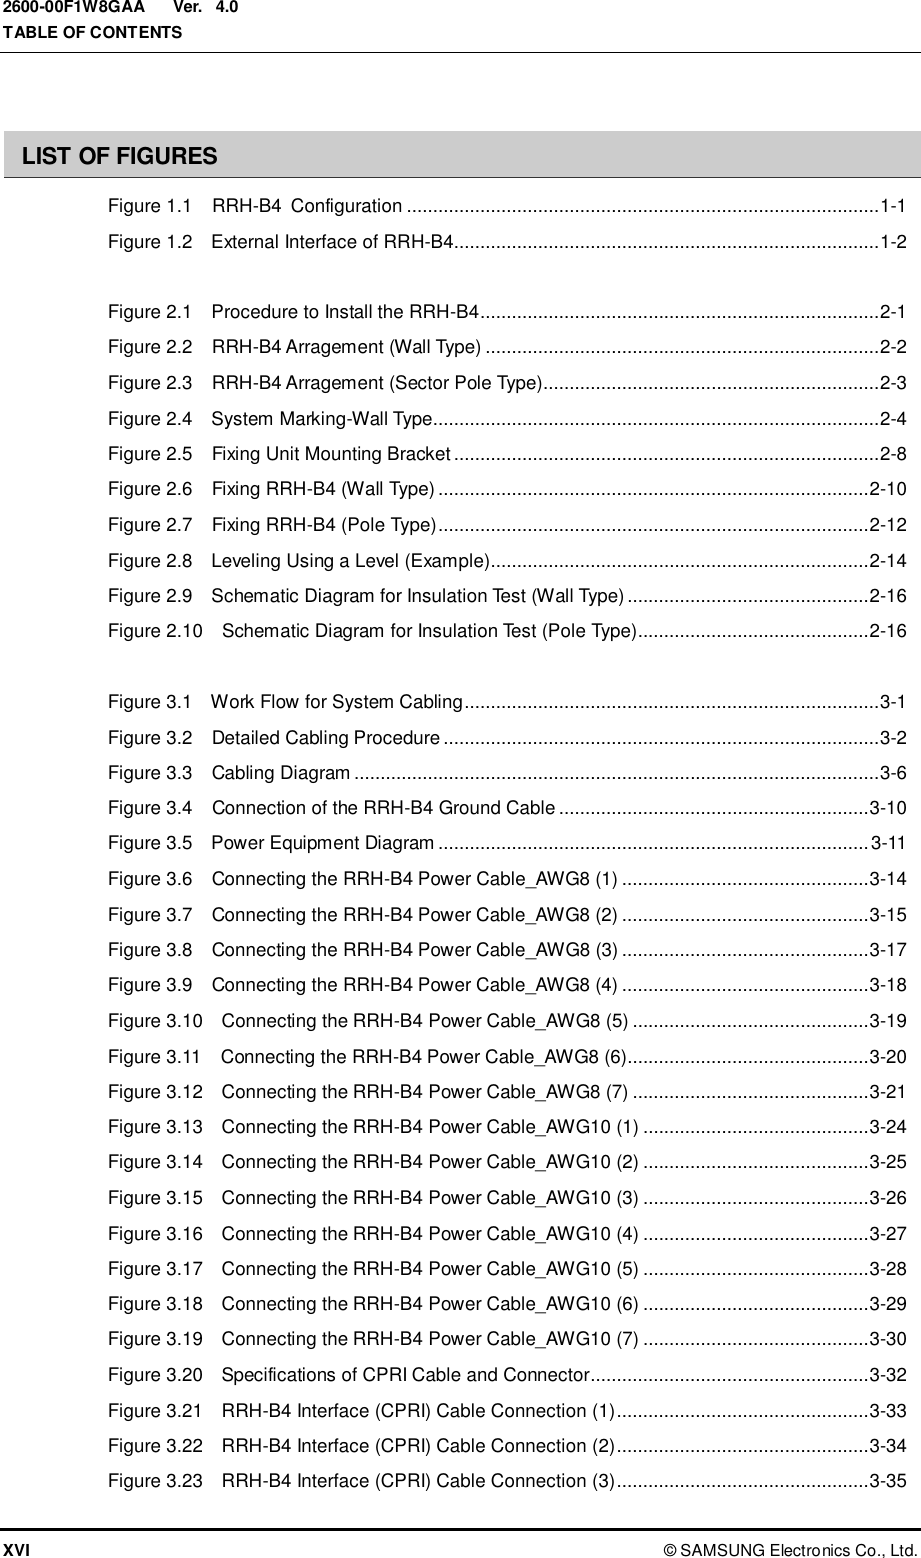  Ver.  TABLE OF CONTENTS XVI ©  SAMSUNG Electronics Co., Ltd. 2600-00F1W8GAA 4.0  LIST OF FIGURES Figure 1.1    RRH-B4  Configuration .......................................................................................... 1-1 Figure 1.2    External Interface of RRH-B4................................................................................. 1-2  Figure 2.1  Procedure to Install the RRH-B4 ............................................................................ 2-1 Figure 2.2    RRH-B4 Arragement (Wall Type) ........................................................................... 2-2 Figure 2.3    RRH-B4 Arragement (Sector Pole Type)................................................................ 2-3 Figure 2.4    System Marking-Wall Type..................................................................................... 2-4 Figure 2.5    Fixing Unit Mounting Bracket ................................................................................. 2-8 Figure 2.6    Fixing RRH-B4 (Wall Type) .................................................................................. 2-10 Figure 2.7    Fixing RRH-B4 (Pole Type) .................................................................................. 2-12 Figure 2.8    Leveling Using a Level (Example)........................................................................ 2-14 Figure 2.9  Schematic Diagram for Insulation Test (Wall Type) .............................................. 2-16 Figure 2.10  Schematic Diagram for Insulation Test (Pole Type)............................................ 2-16  Figure 3.1  Work Flow for System Cabling ............................................................................... 3-1 Figure 3.2    Detailed Cabling Procedure ................................................................................... 3-2 Figure 3.3    Cabling Diagram .................................................................................................... 3-6 Figure 3.4    Connection of the RRH-B4 Ground Cable ........................................................... 3-10 Figure 3.5    Power Equipment Diagram .................................................................................. 3-11 Figure 3.6    Connecting the RRH-B4 Power Cable_AWG8 (1) ............................................... 3-14 Figure 3.7    Connecting the RRH-B4 Power Cable_AWG8 (2) ............................................... 3-15 Figure 3.8    Connecting the RRH-B4 Power Cable_AWG8 (3) ............................................... 3-17 Figure 3.9    Connecting the RRH-B4 Power Cable_AWG8 (4) ............................................... 3-18 Figure 3.10    Connecting the RRH-B4 Power Cable_AWG8 (5) ............................................. 3-19 Figure 3.11    Connecting the RRH-B4 Power Cable_AWG8 (6).............................................. 3-20 Figure 3.12    Connecting the RRH-B4 Power Cable_AWG8 (7) ............................................. 3-21 Figure 3.13    Connecting the RRH-B4 Power Cable_AWG10 (1) ........................................... 3-24 Figure 3.14    Connecting the RRH-B4 Power Cable_AWG10 (2) ........................................... 3-25 Figure 3.15    Connecting the RRH-B4 Power Cable_AWG10 (3) ........................................... 3-26 Figure 3.16    Connecting the RRH-B4 Power Cable_AWG10 (4) ........................................... 3-27 Figure 3.17    Connecting the RRH-B4 Power Cable_AWG10 (5) ........................................... 3-28 Figure 3.18    Connecting the RRH-B4 Power Cable_AWG10 (6) ........................................... 3-29 Figure 3.19    Connecting the RRH-B4 Power Cable_AWG10 (7) ........................................... 3-30 Figure 3.20    Specifications of CPRI Cable and Connector ..................................................... 3-32 Figure 3.21    RRH-B4 Interface (CPRI) Cable Connection (1) ................................................ 3-33 Figure 3.22    RRH-B4 Interface (CPRI) Cable Connection (2) ................................................ 3-34 Figure 3.23    RRH-B4 Interface (CPRI) Cable Connection (3) ................................................ 3-35 